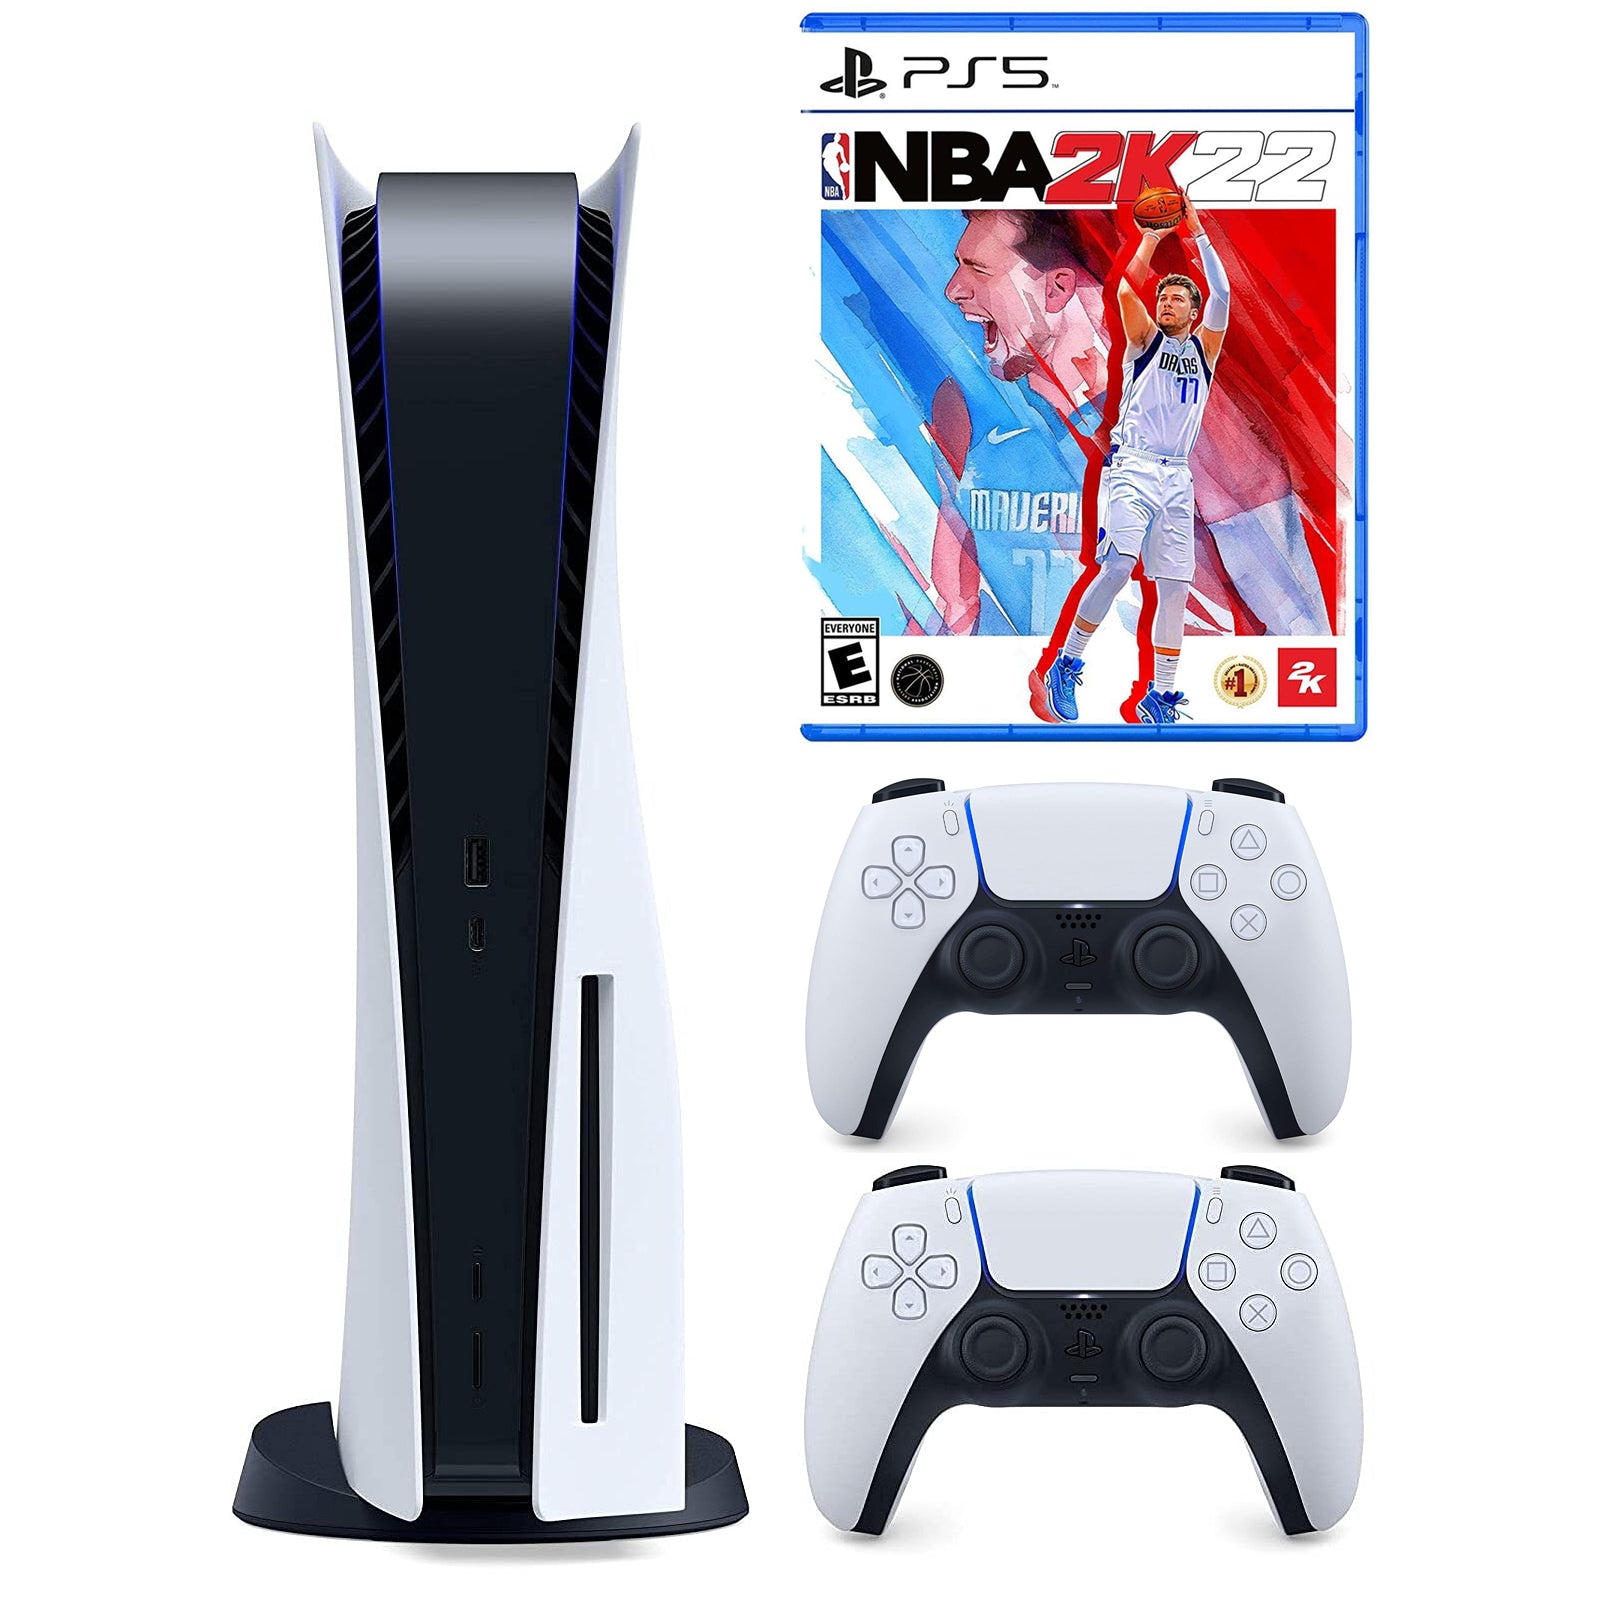 Sony Playstation 5 Disc Version with Extra Controller and NBA 2K22 Bundle - Pro-Distributing